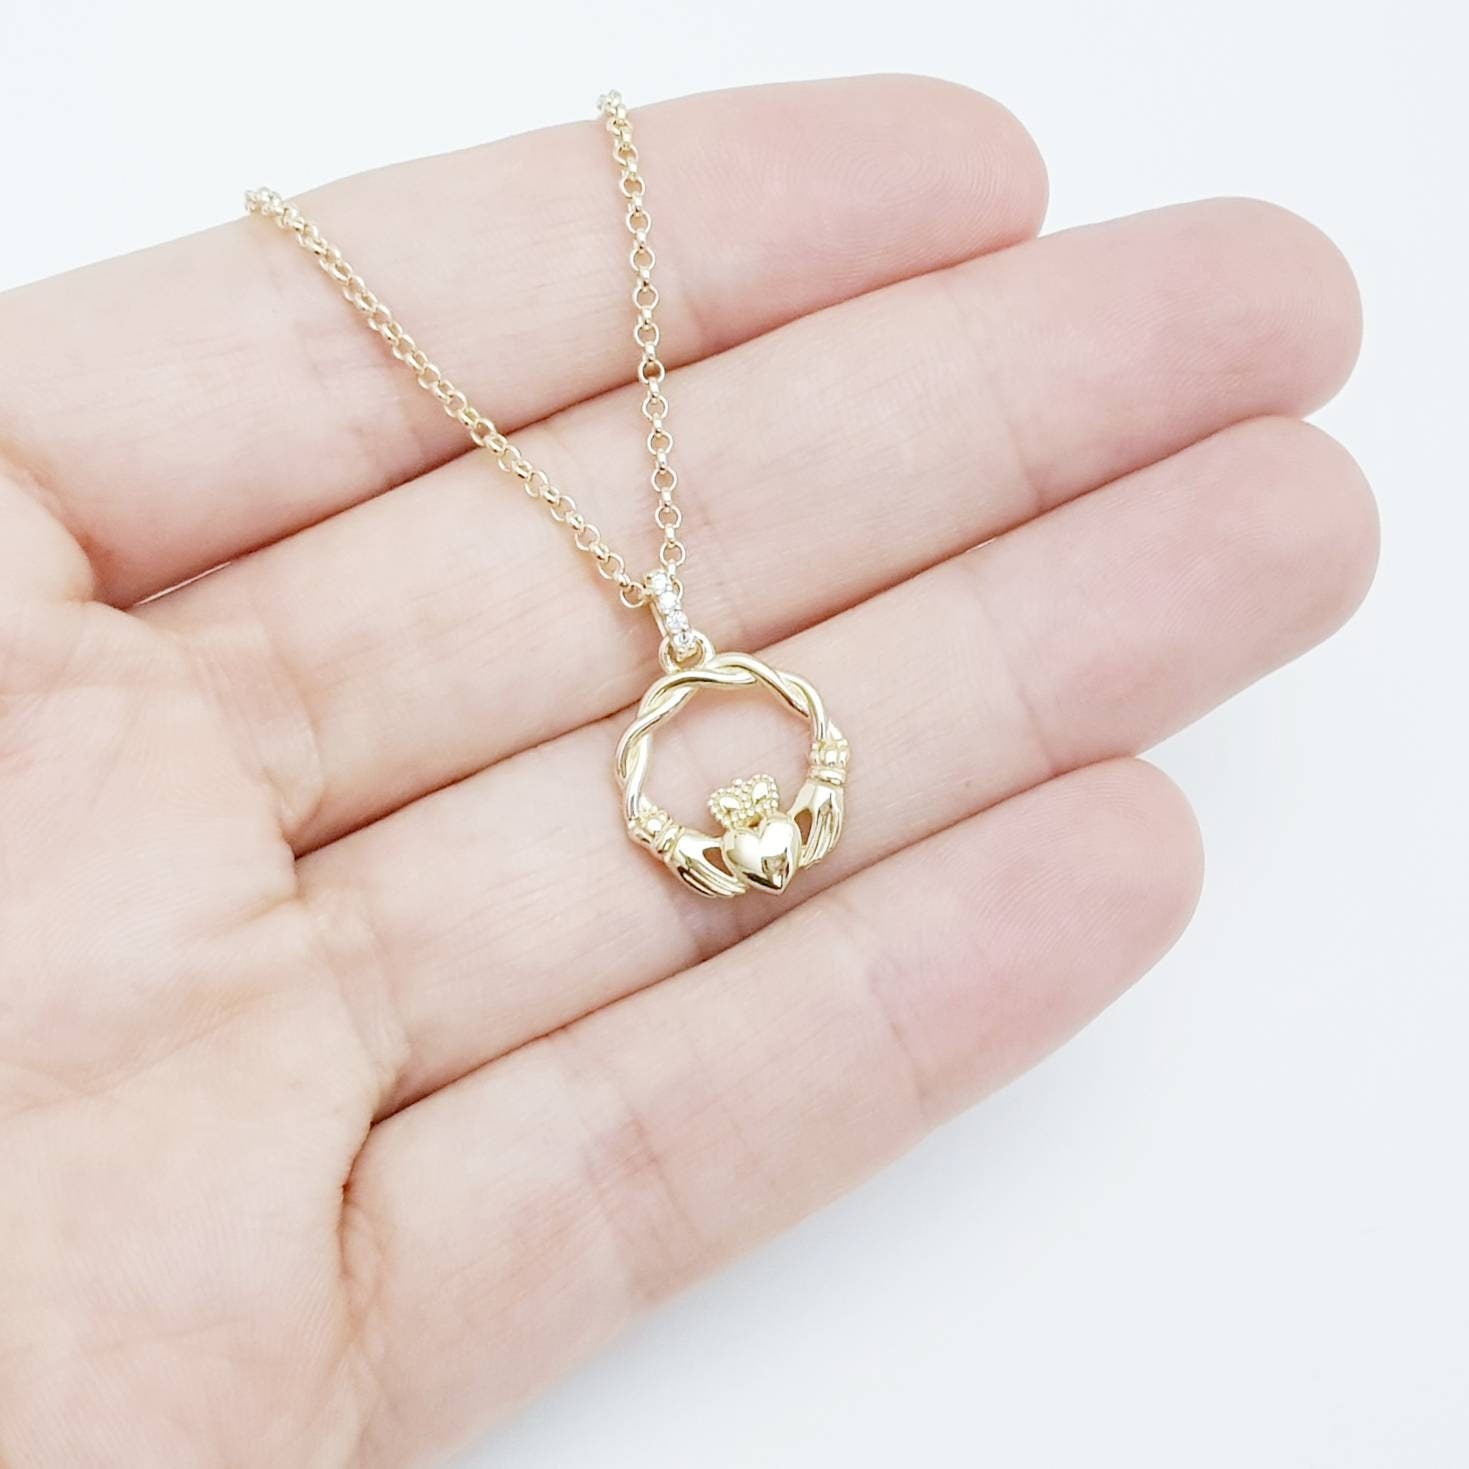 Dainty Sterling Silver claddagh necklace with gold plating and intertwined celtic braid.